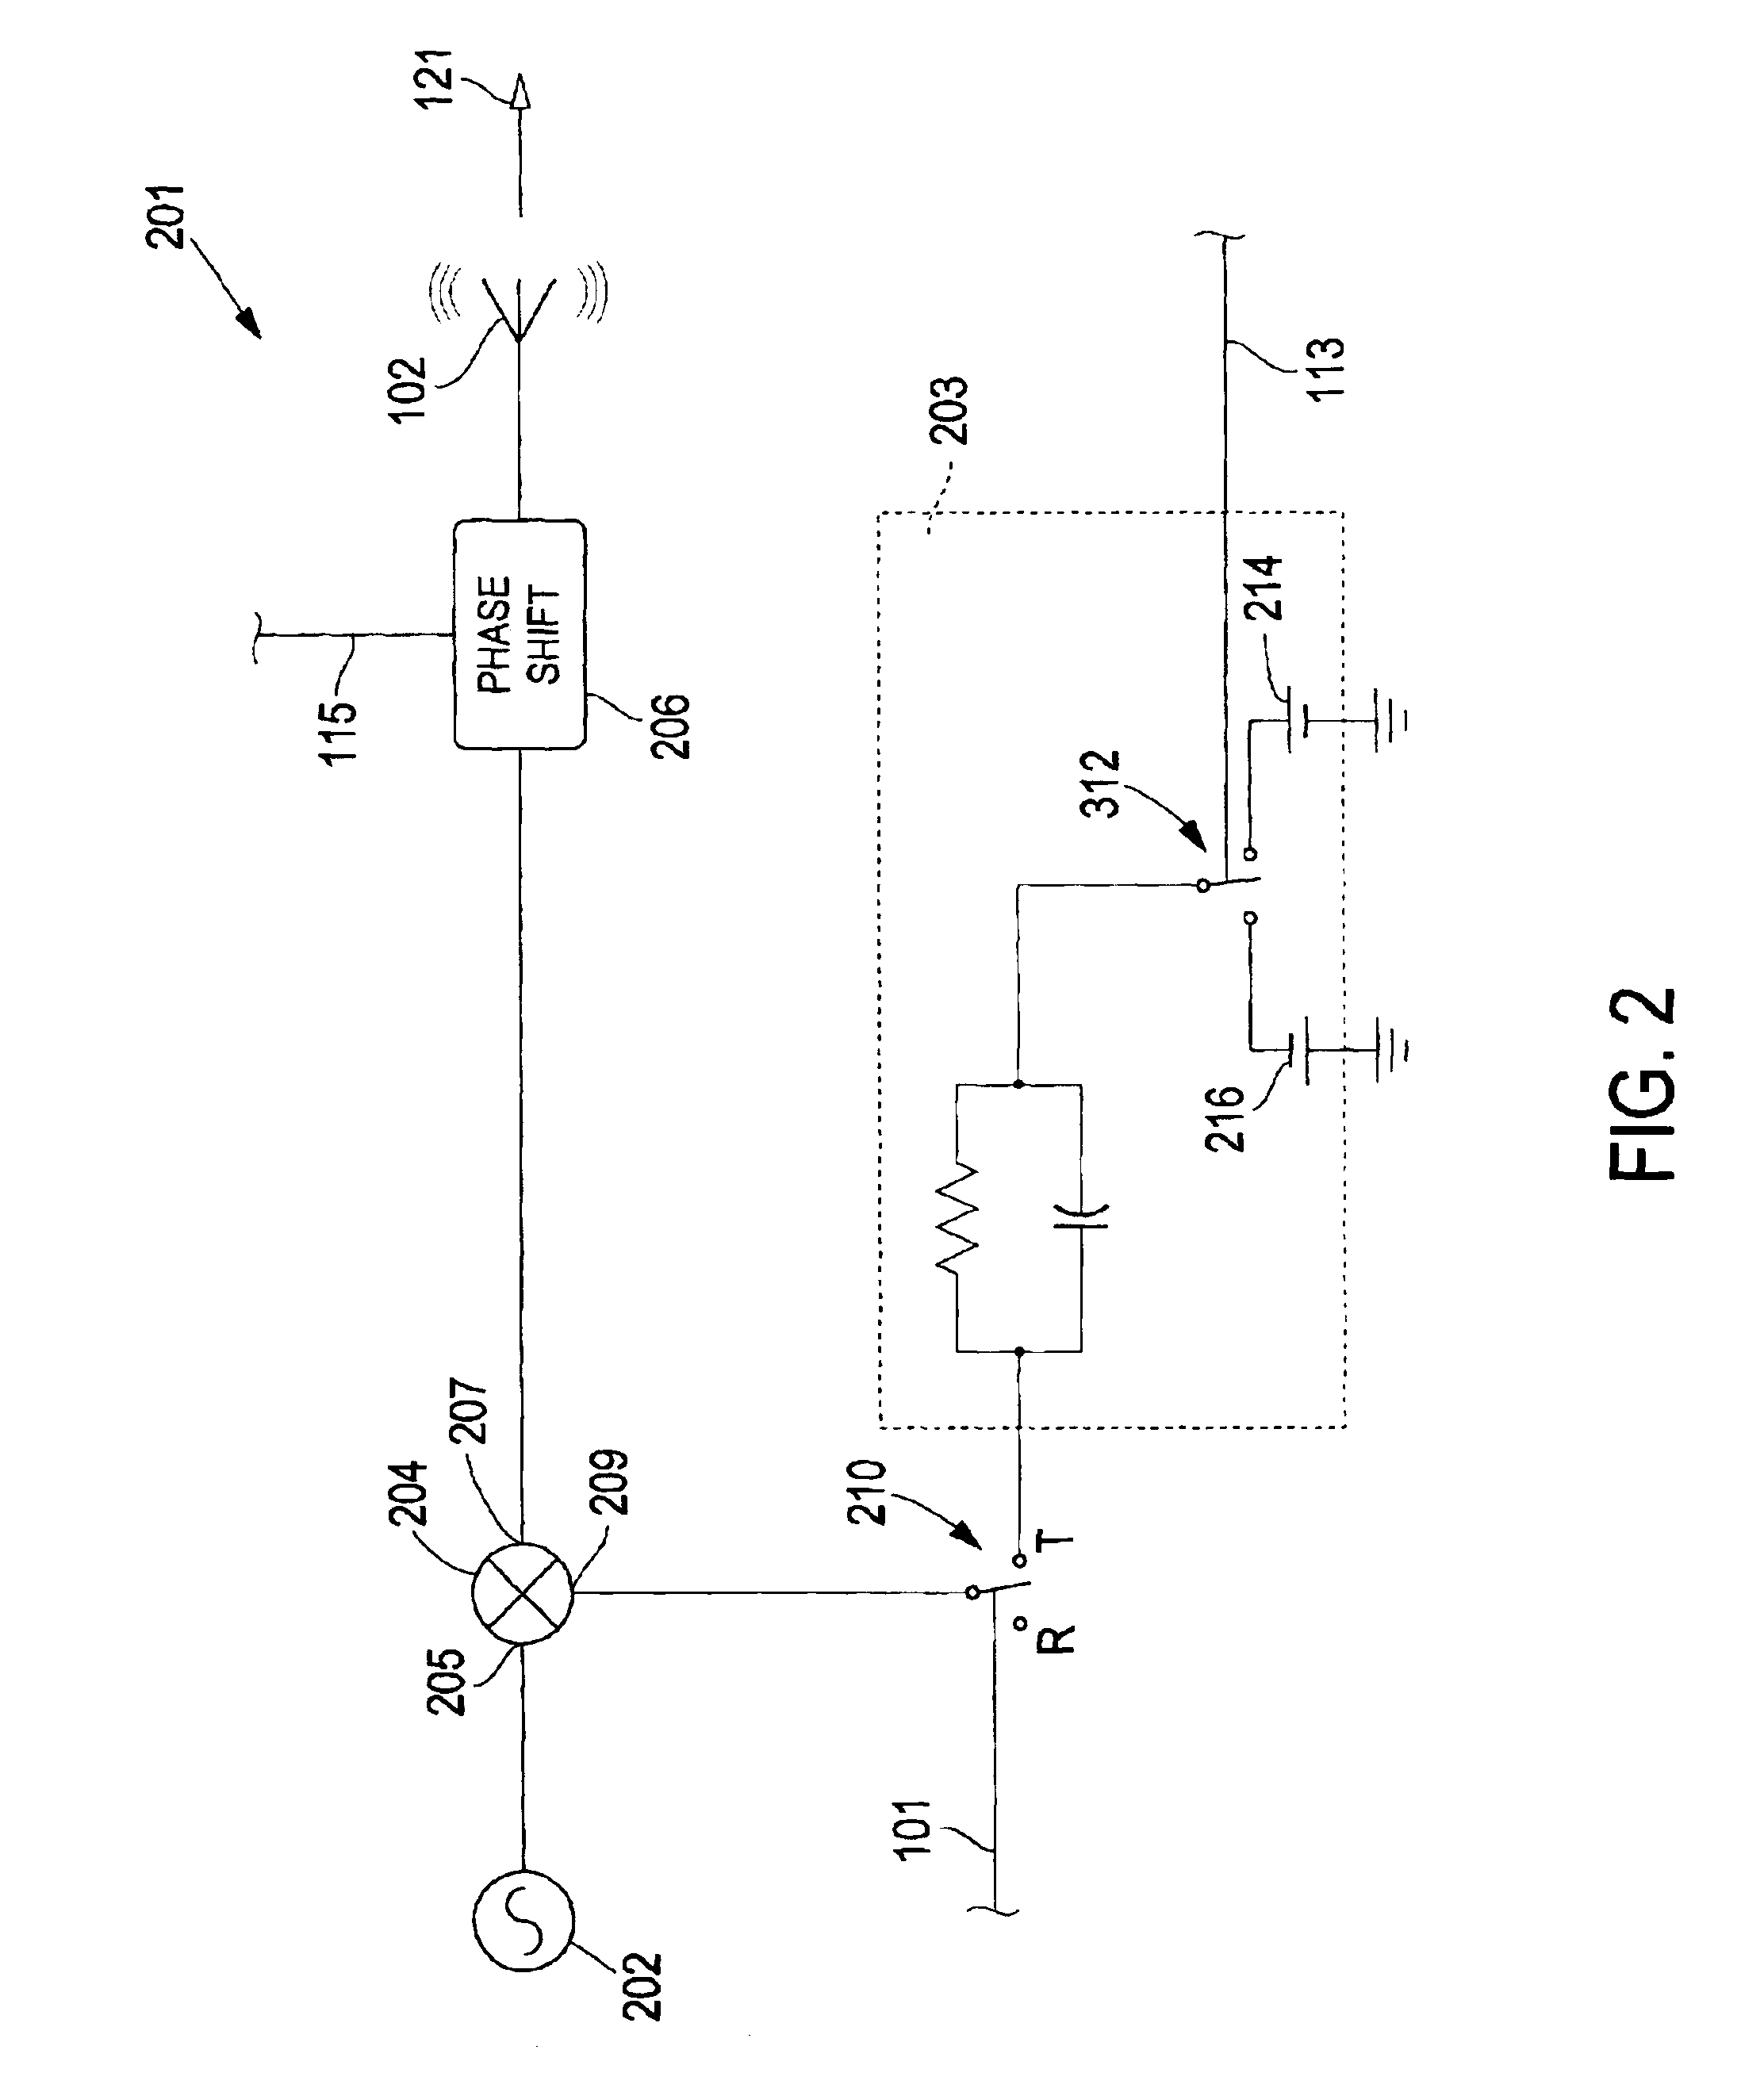 Sensor front-end with phase coding capability